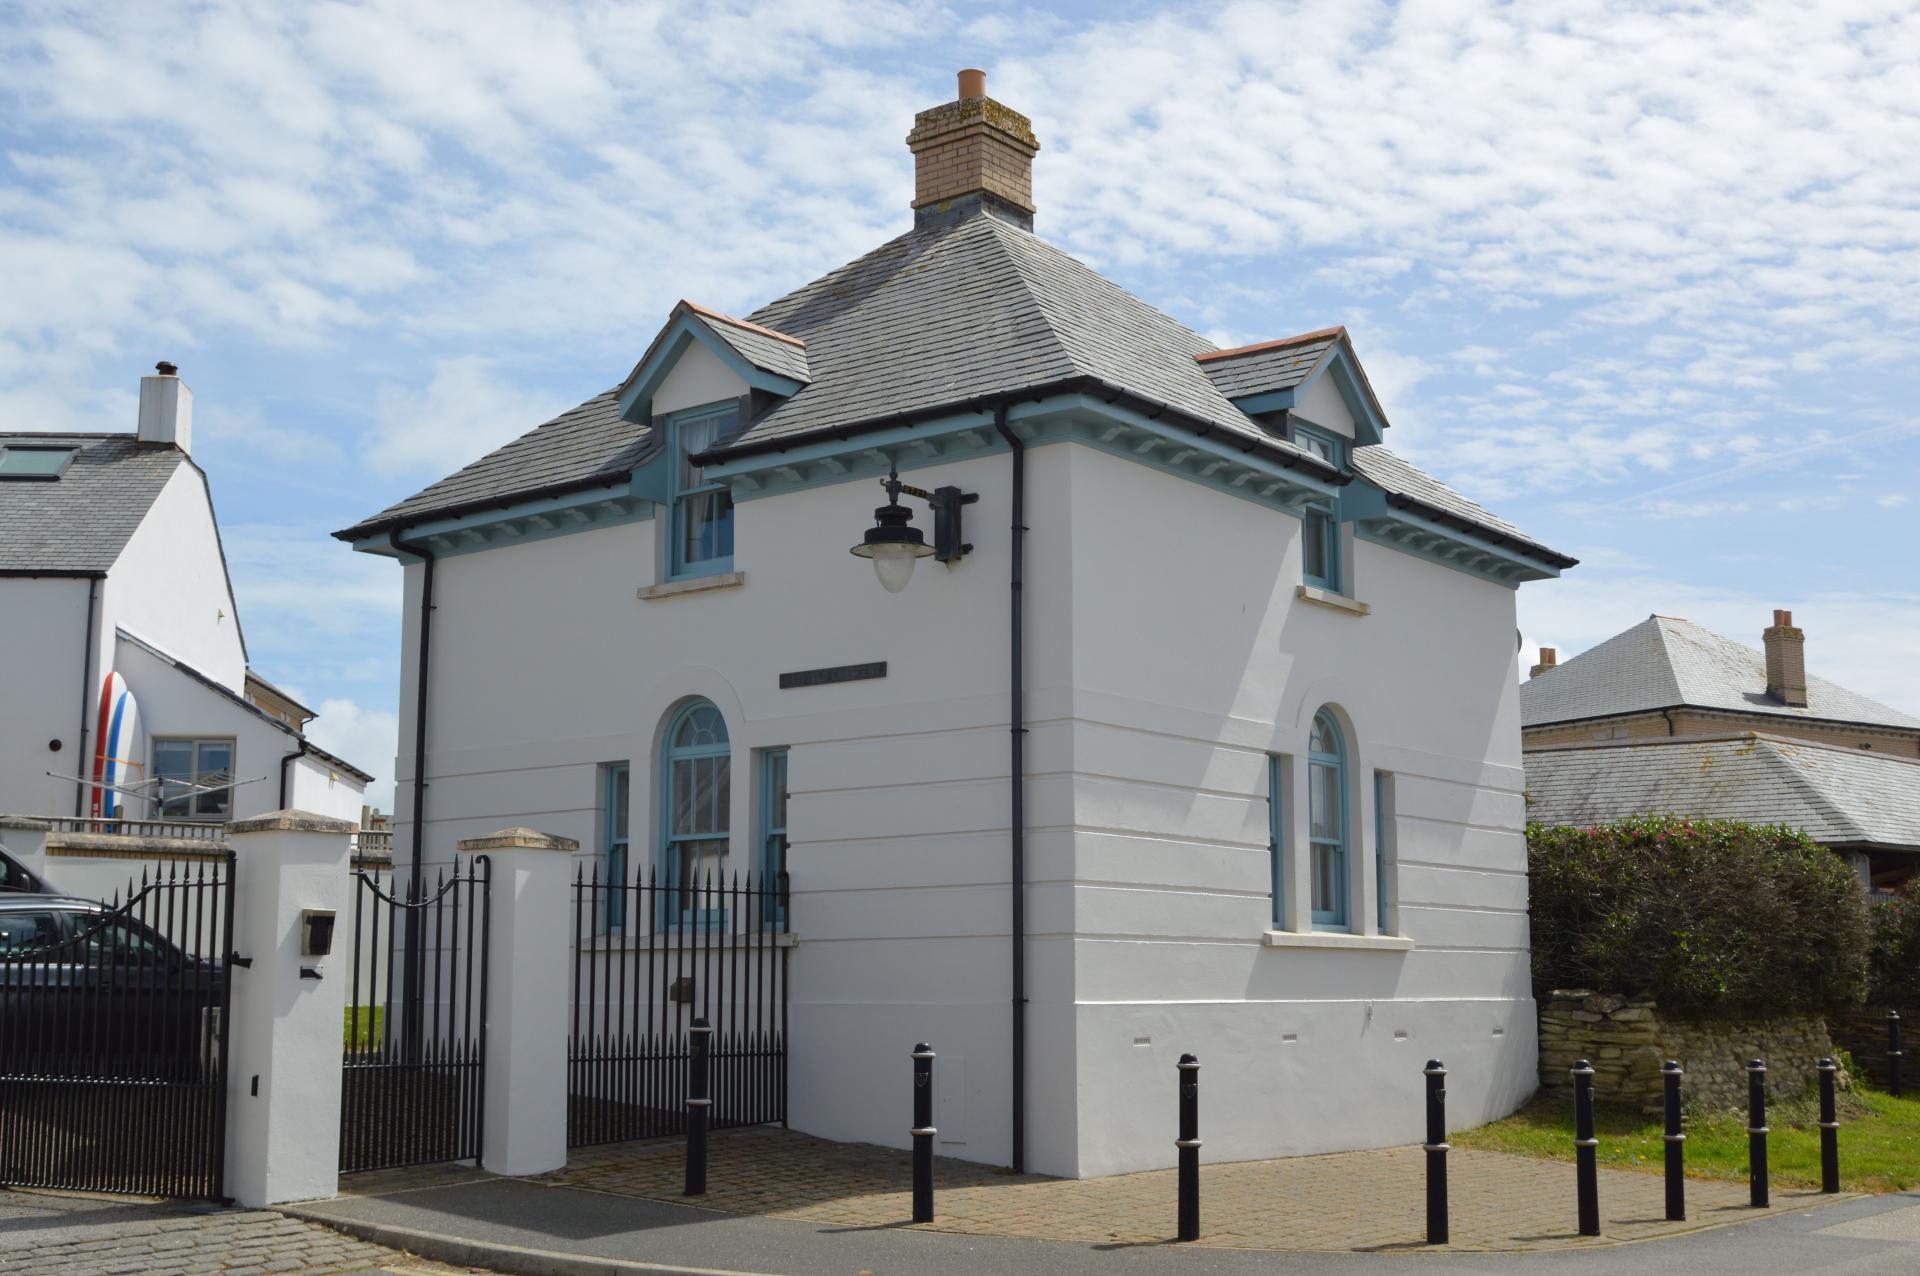 2 Bedroom House for sale in Newquay